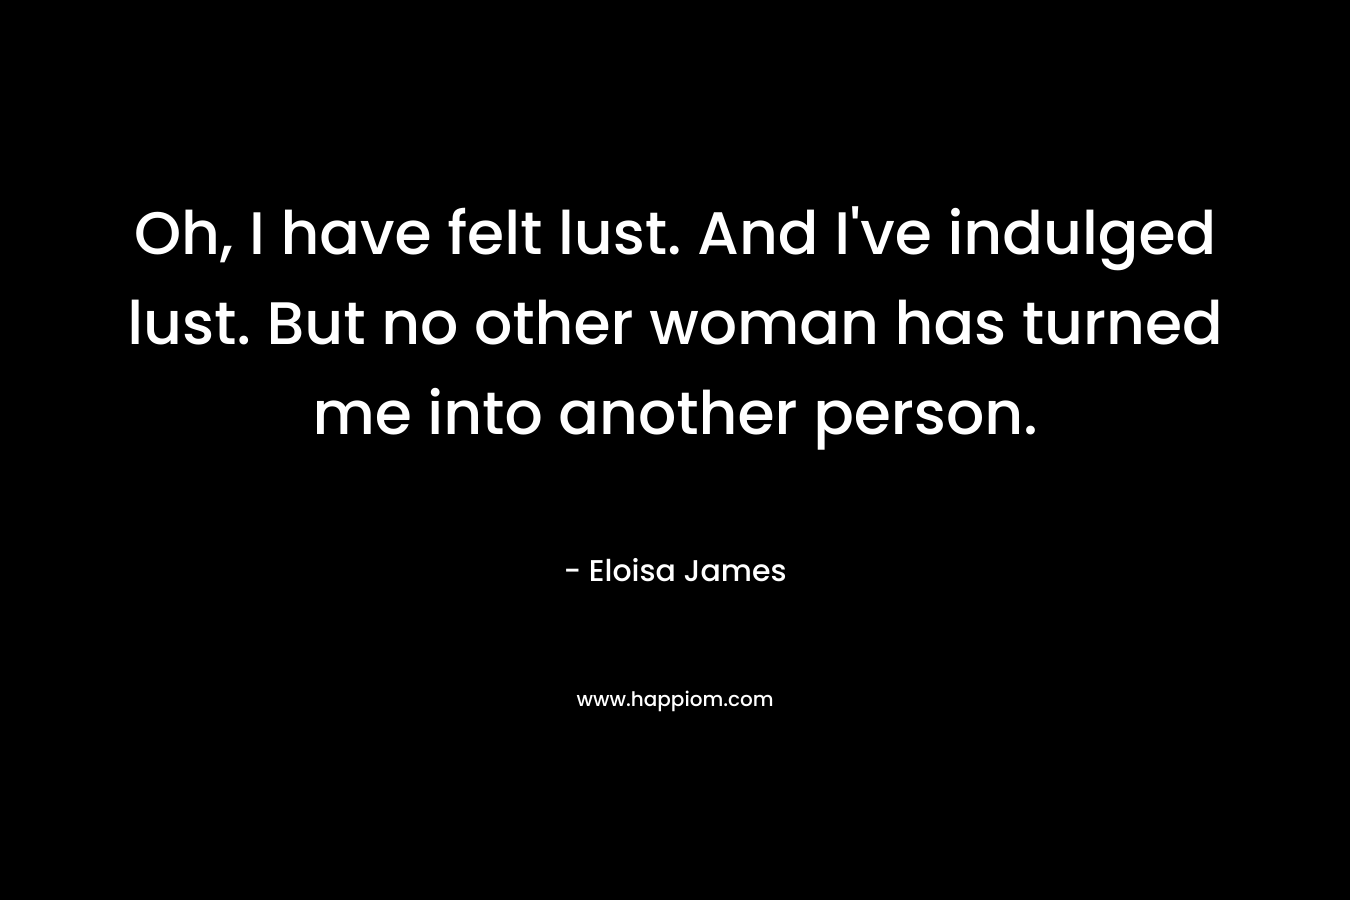 Oh, I have felt lust. And I’ve indulged lust. But no other woman has turned me into another person. – Eloisa James